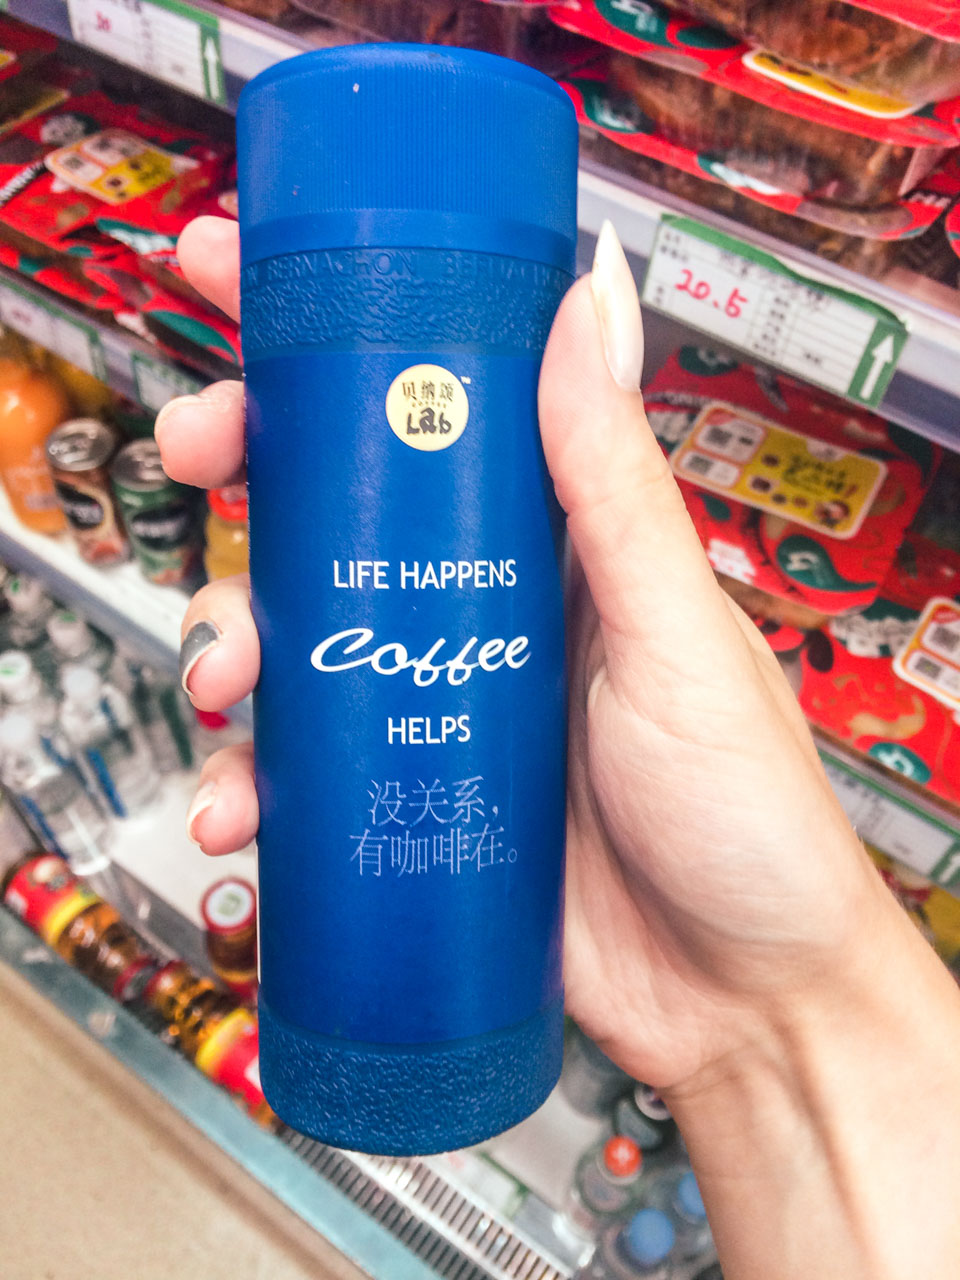 Woman's hand holding a can of coffee with "Life happens, coffee helps" and Chinese translation on it